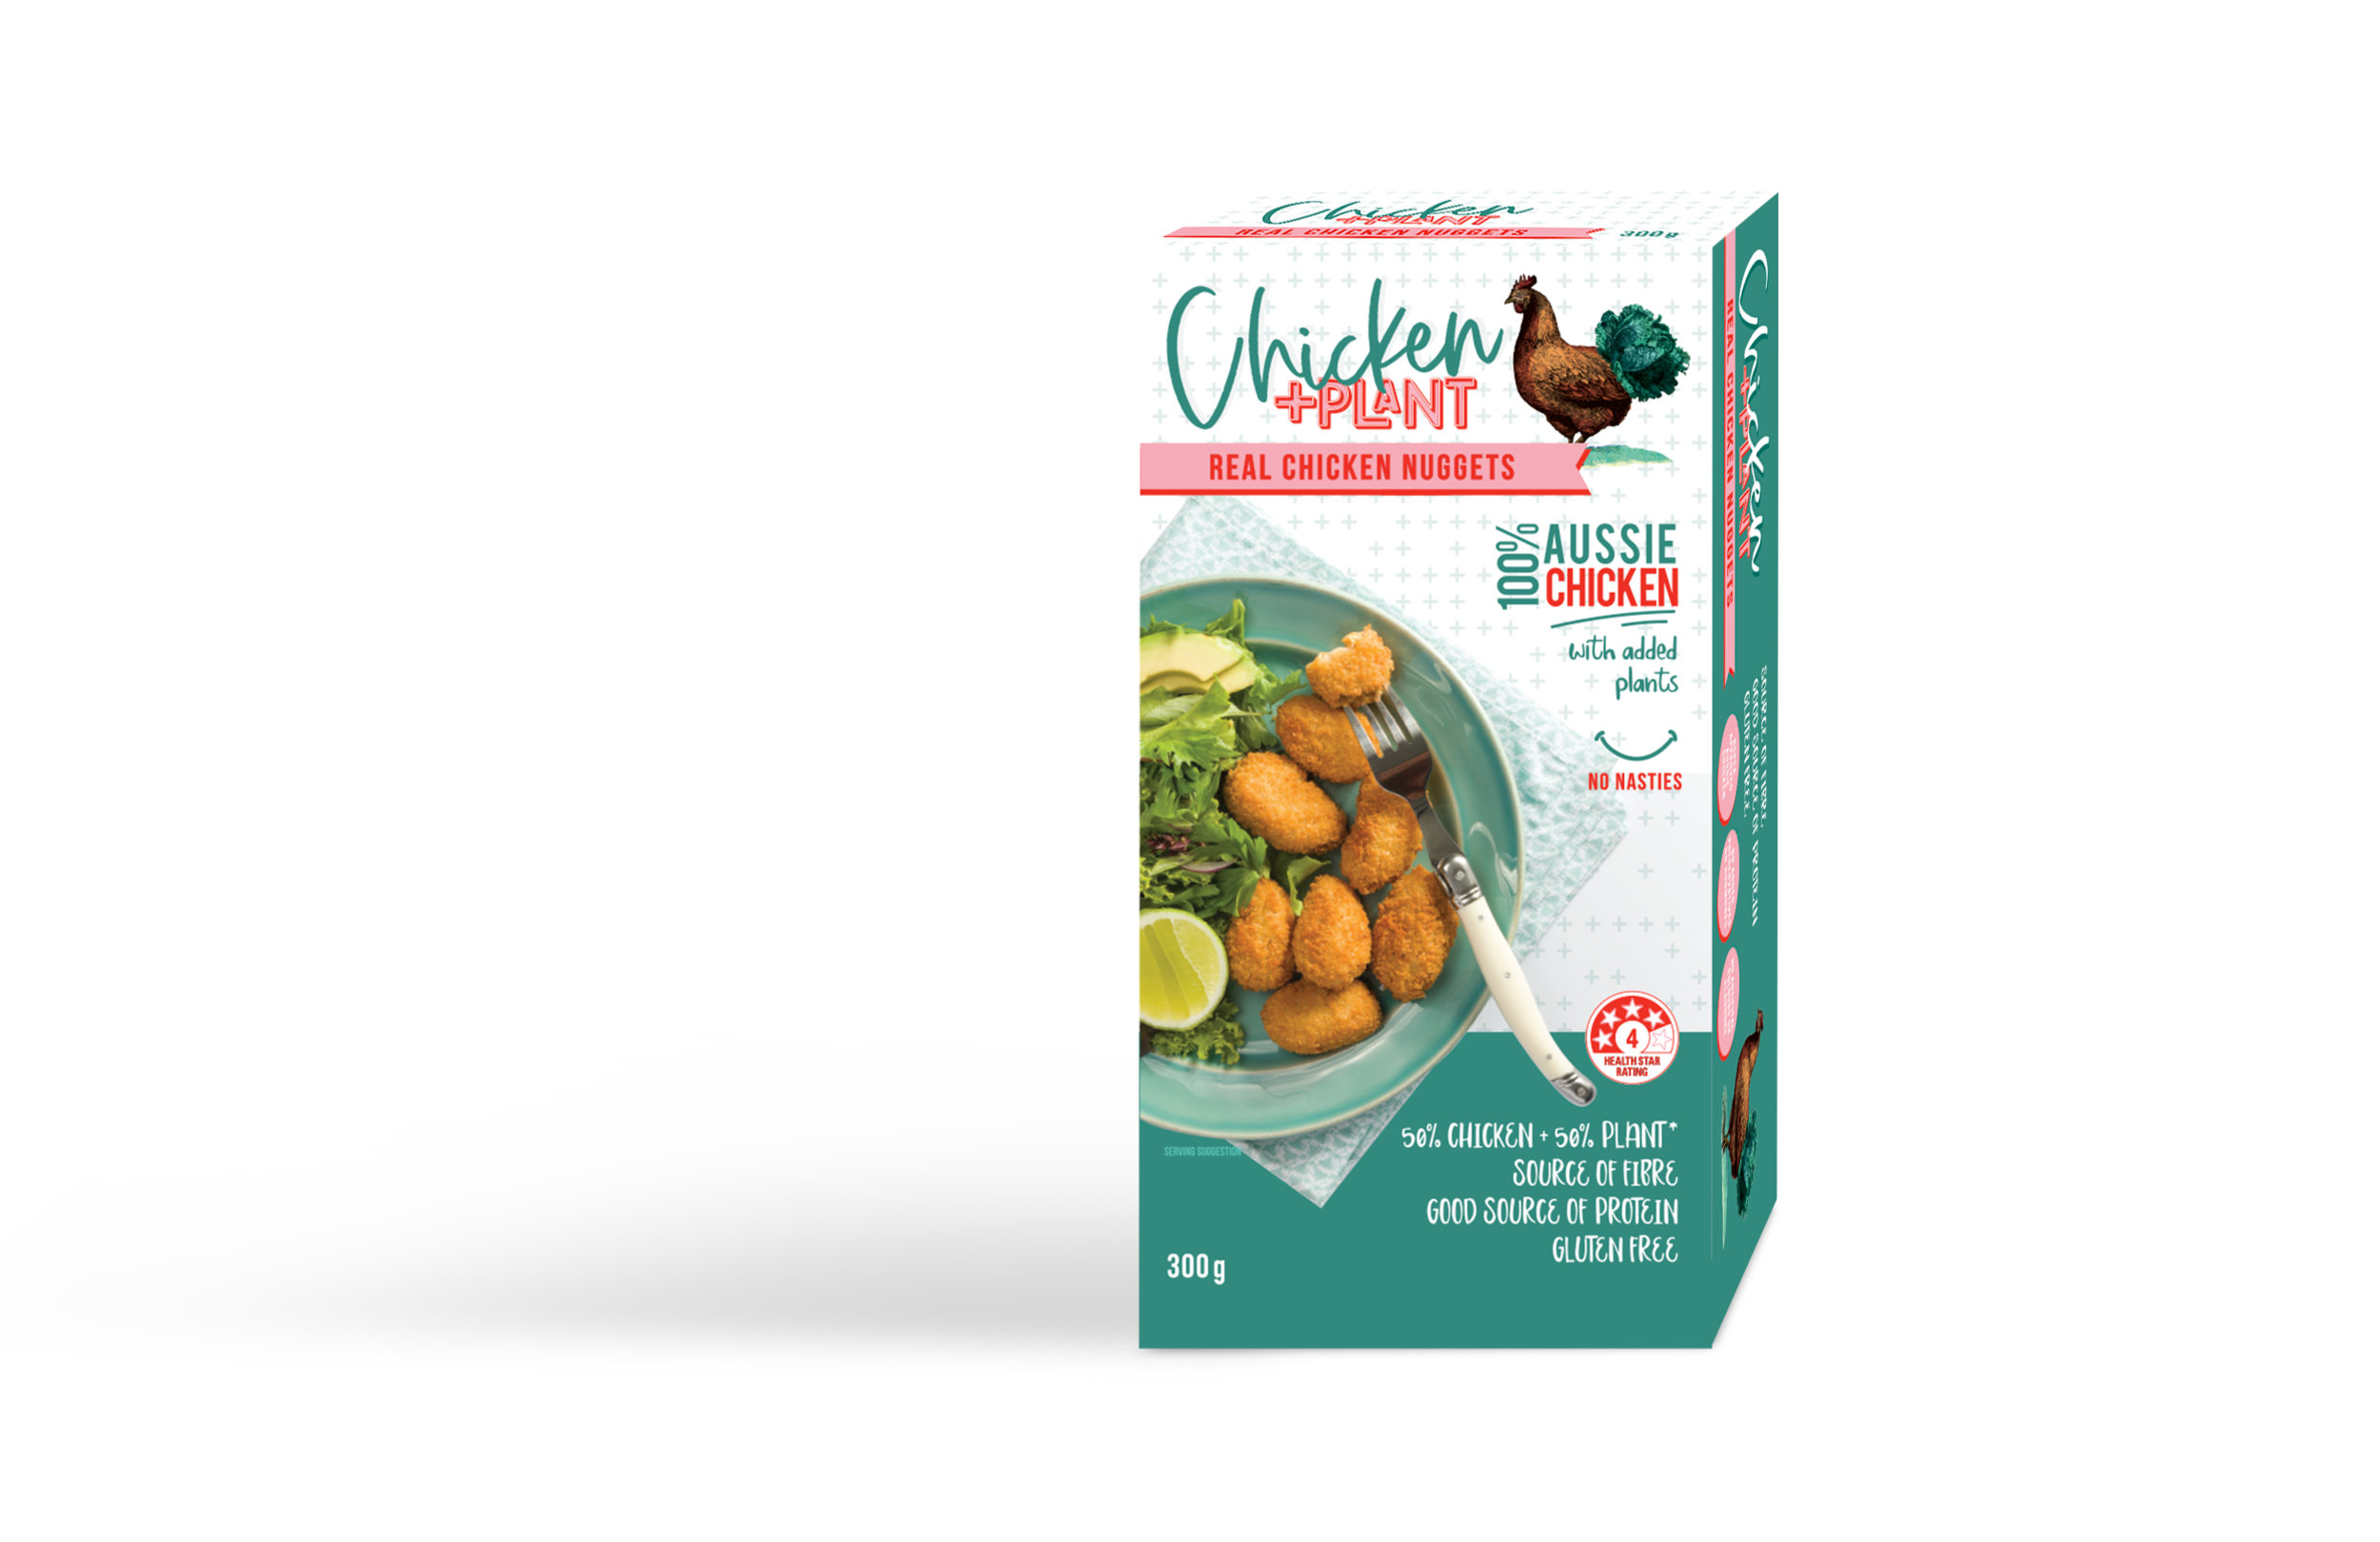 2934RT-Chicken-Plant-Nuggets-Mockup-FrontView.png